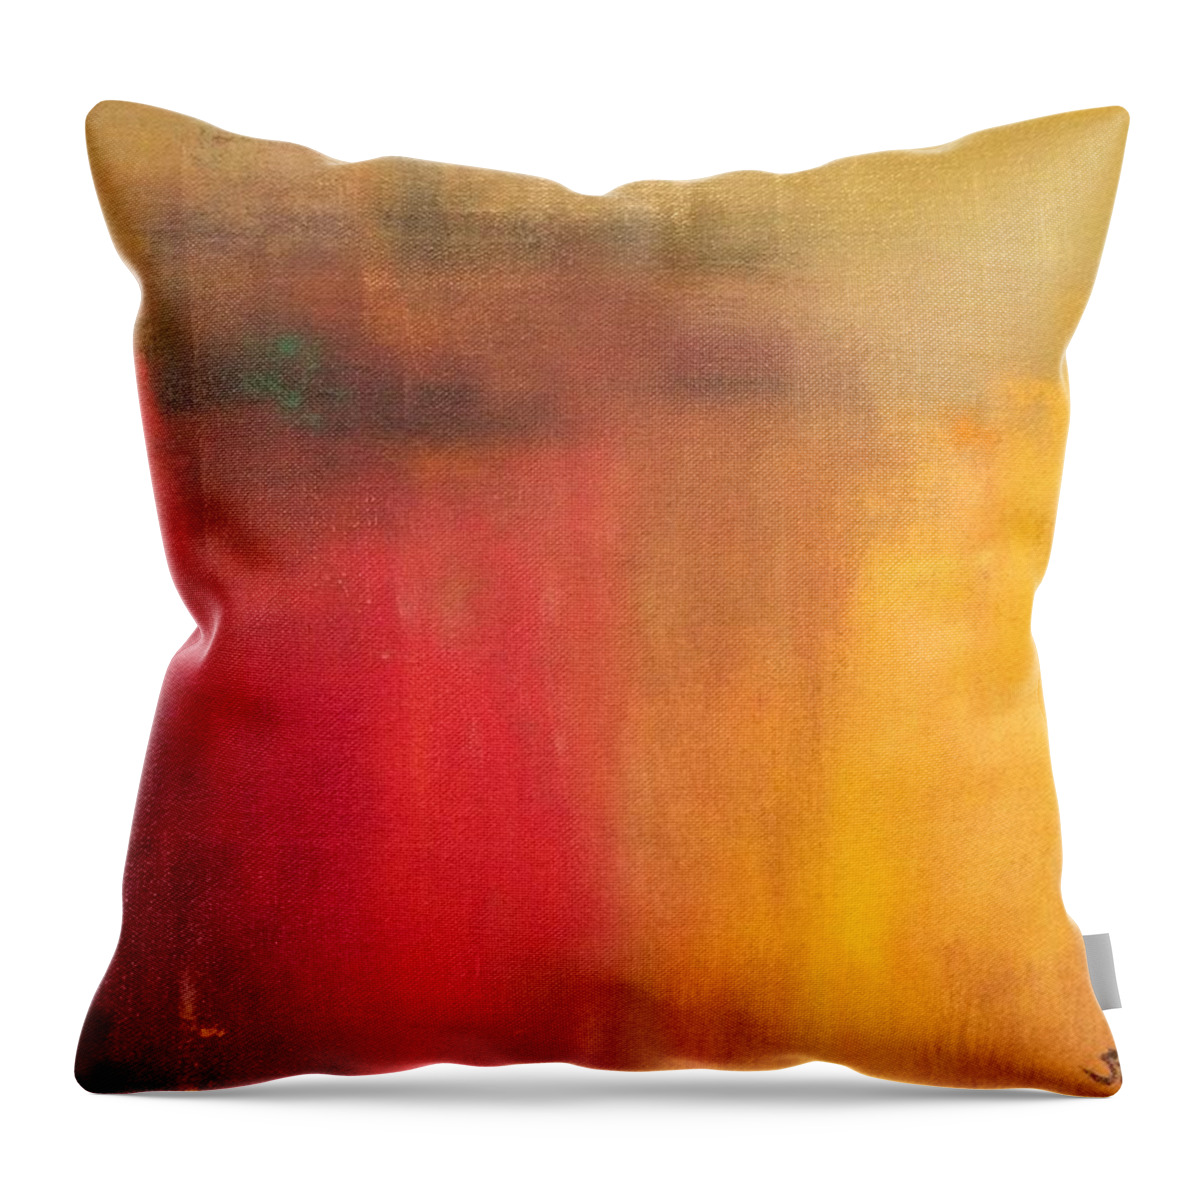 Breathe Throw Pillow featuring the painting Breathe by Kathy Stiber